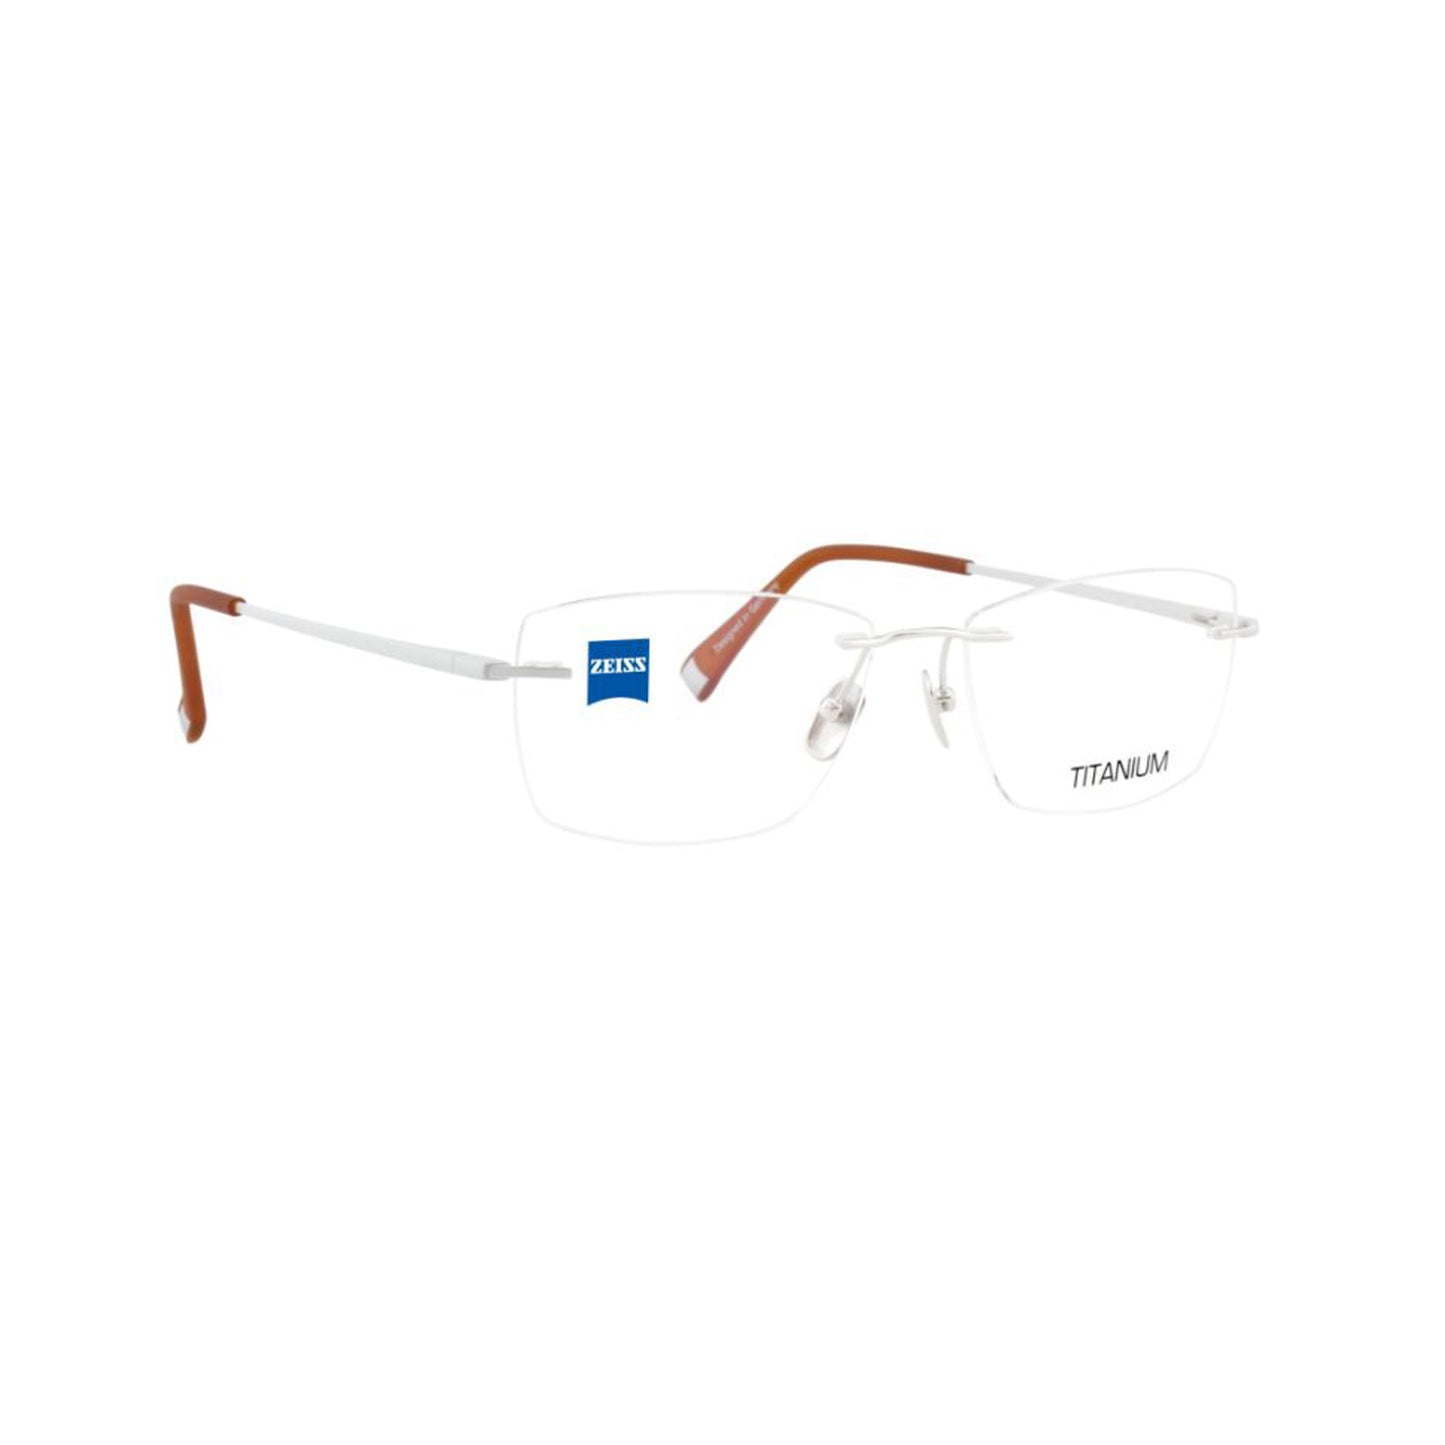 Zeiss Eyewear Silver Square Metal Rimless Eyeglasses. Made in Germany ZS50005-Y17